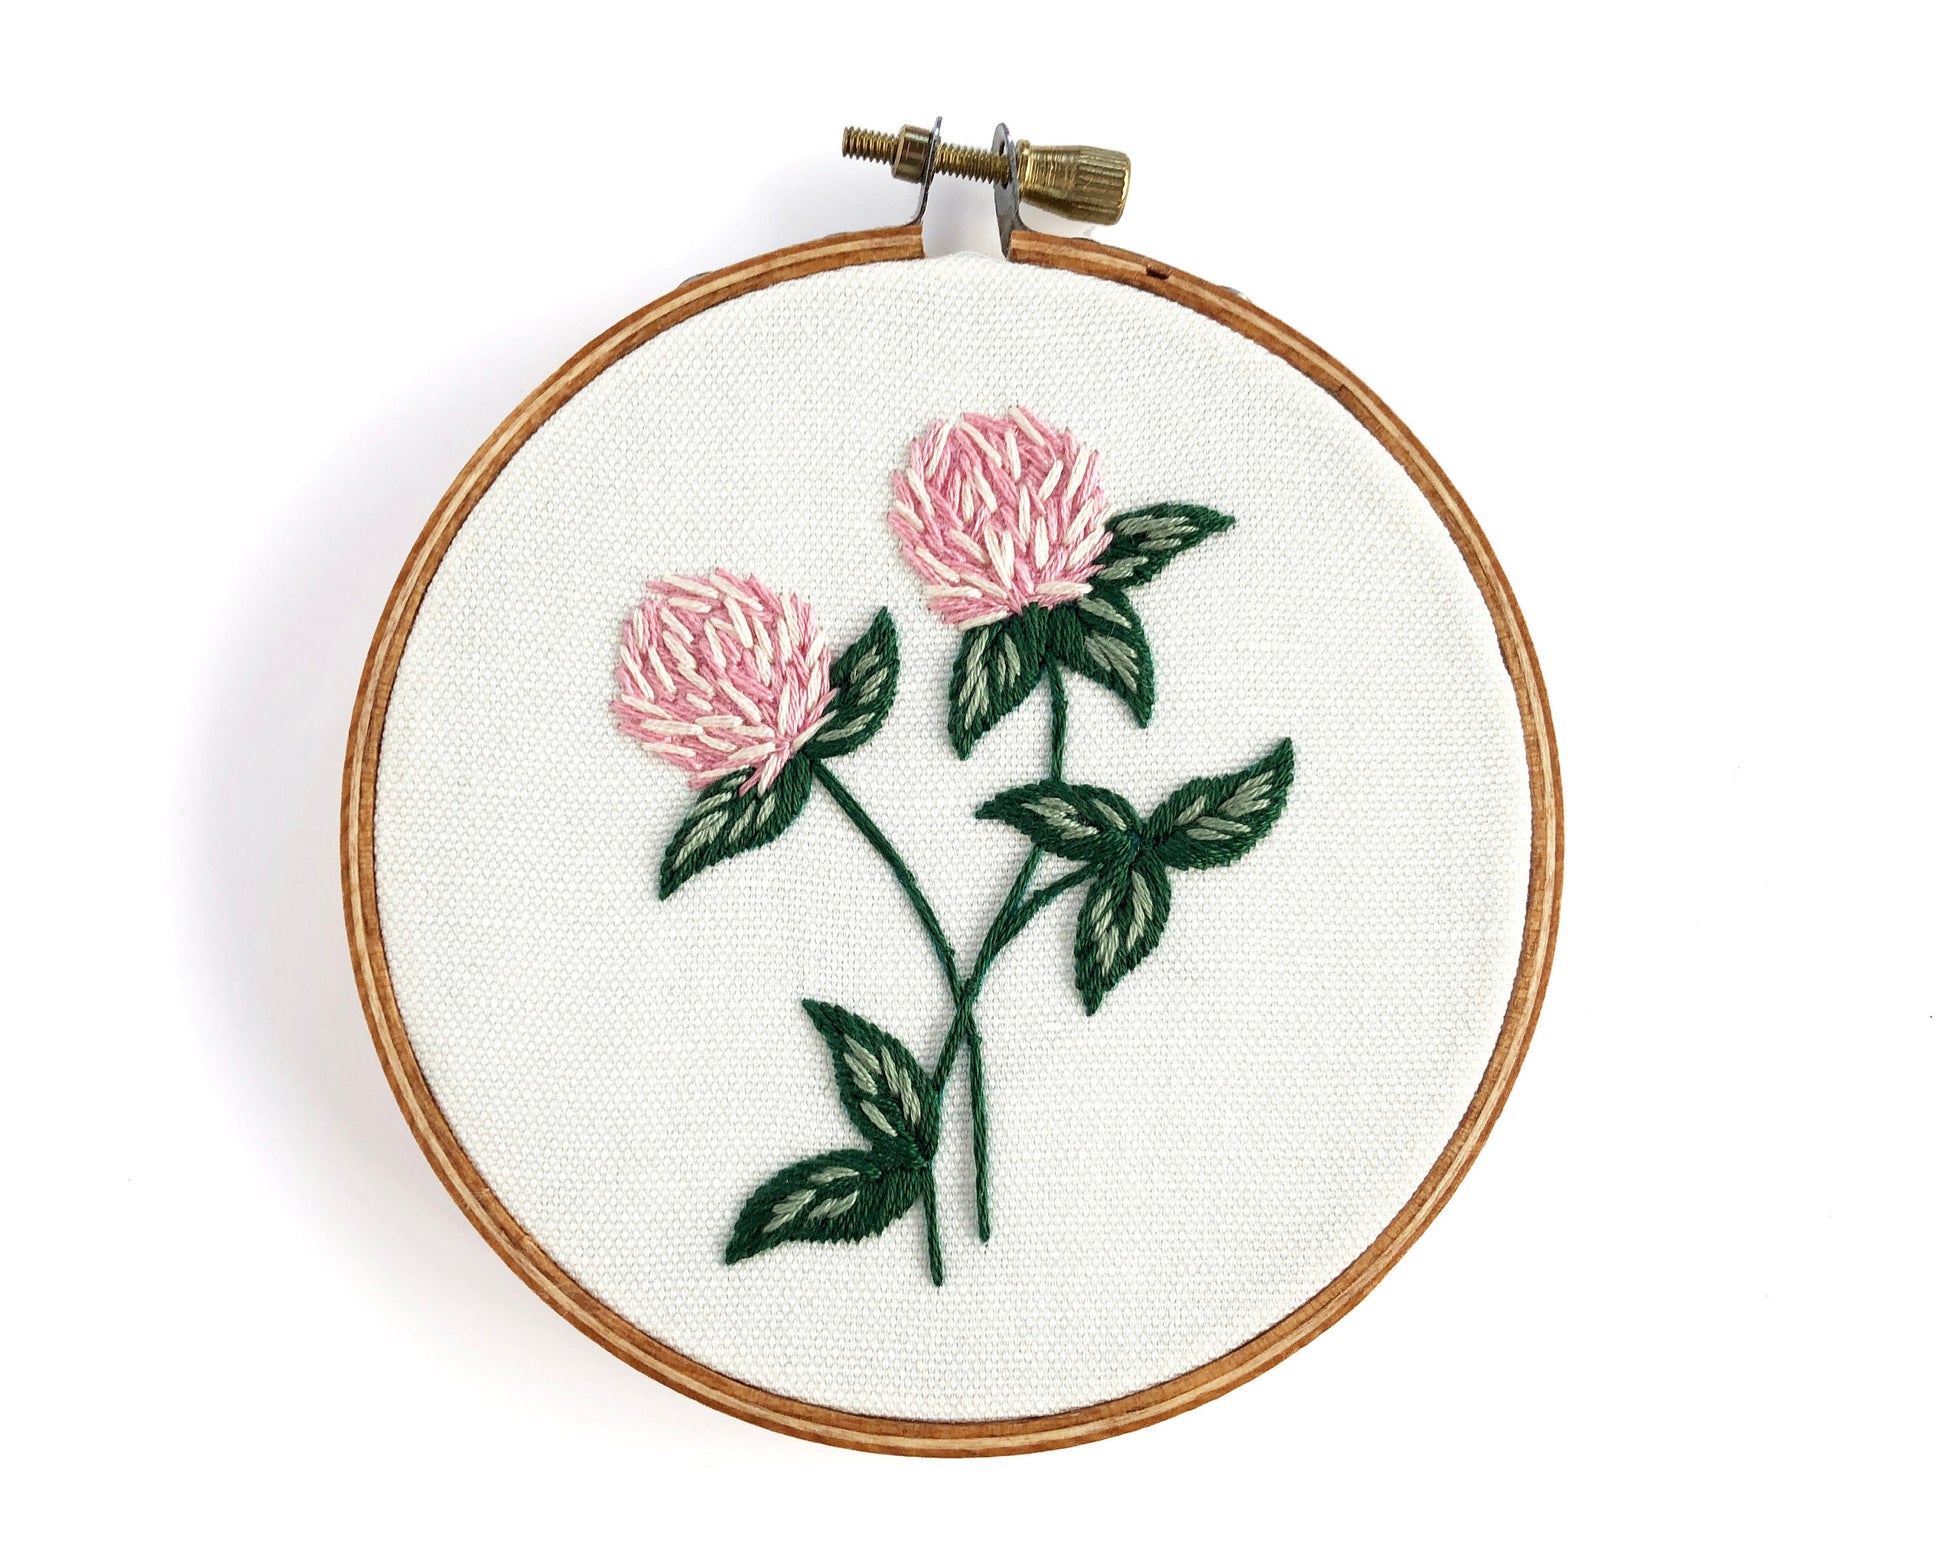 Mini Wildflower Kit, Embroidery Kit, DIY Craft, Botanical Embroidery, Beginner embroidery pattern, Wildflower Embroidery, Clover embroidery